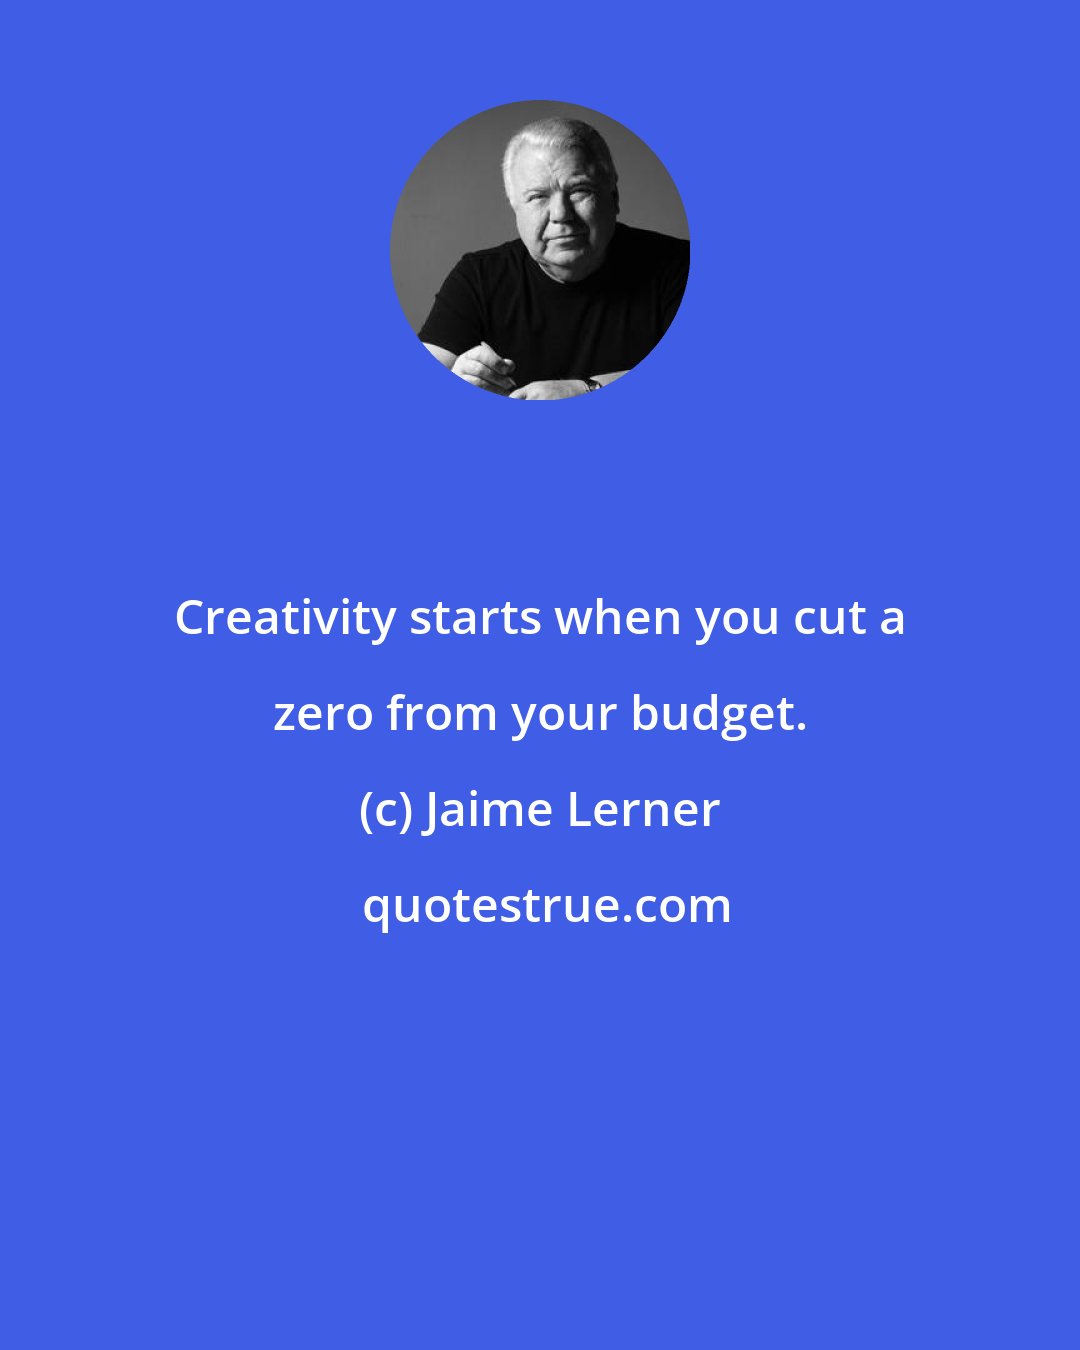 Jaime Lerner: Creativity starts when you cut a zero from your budget.